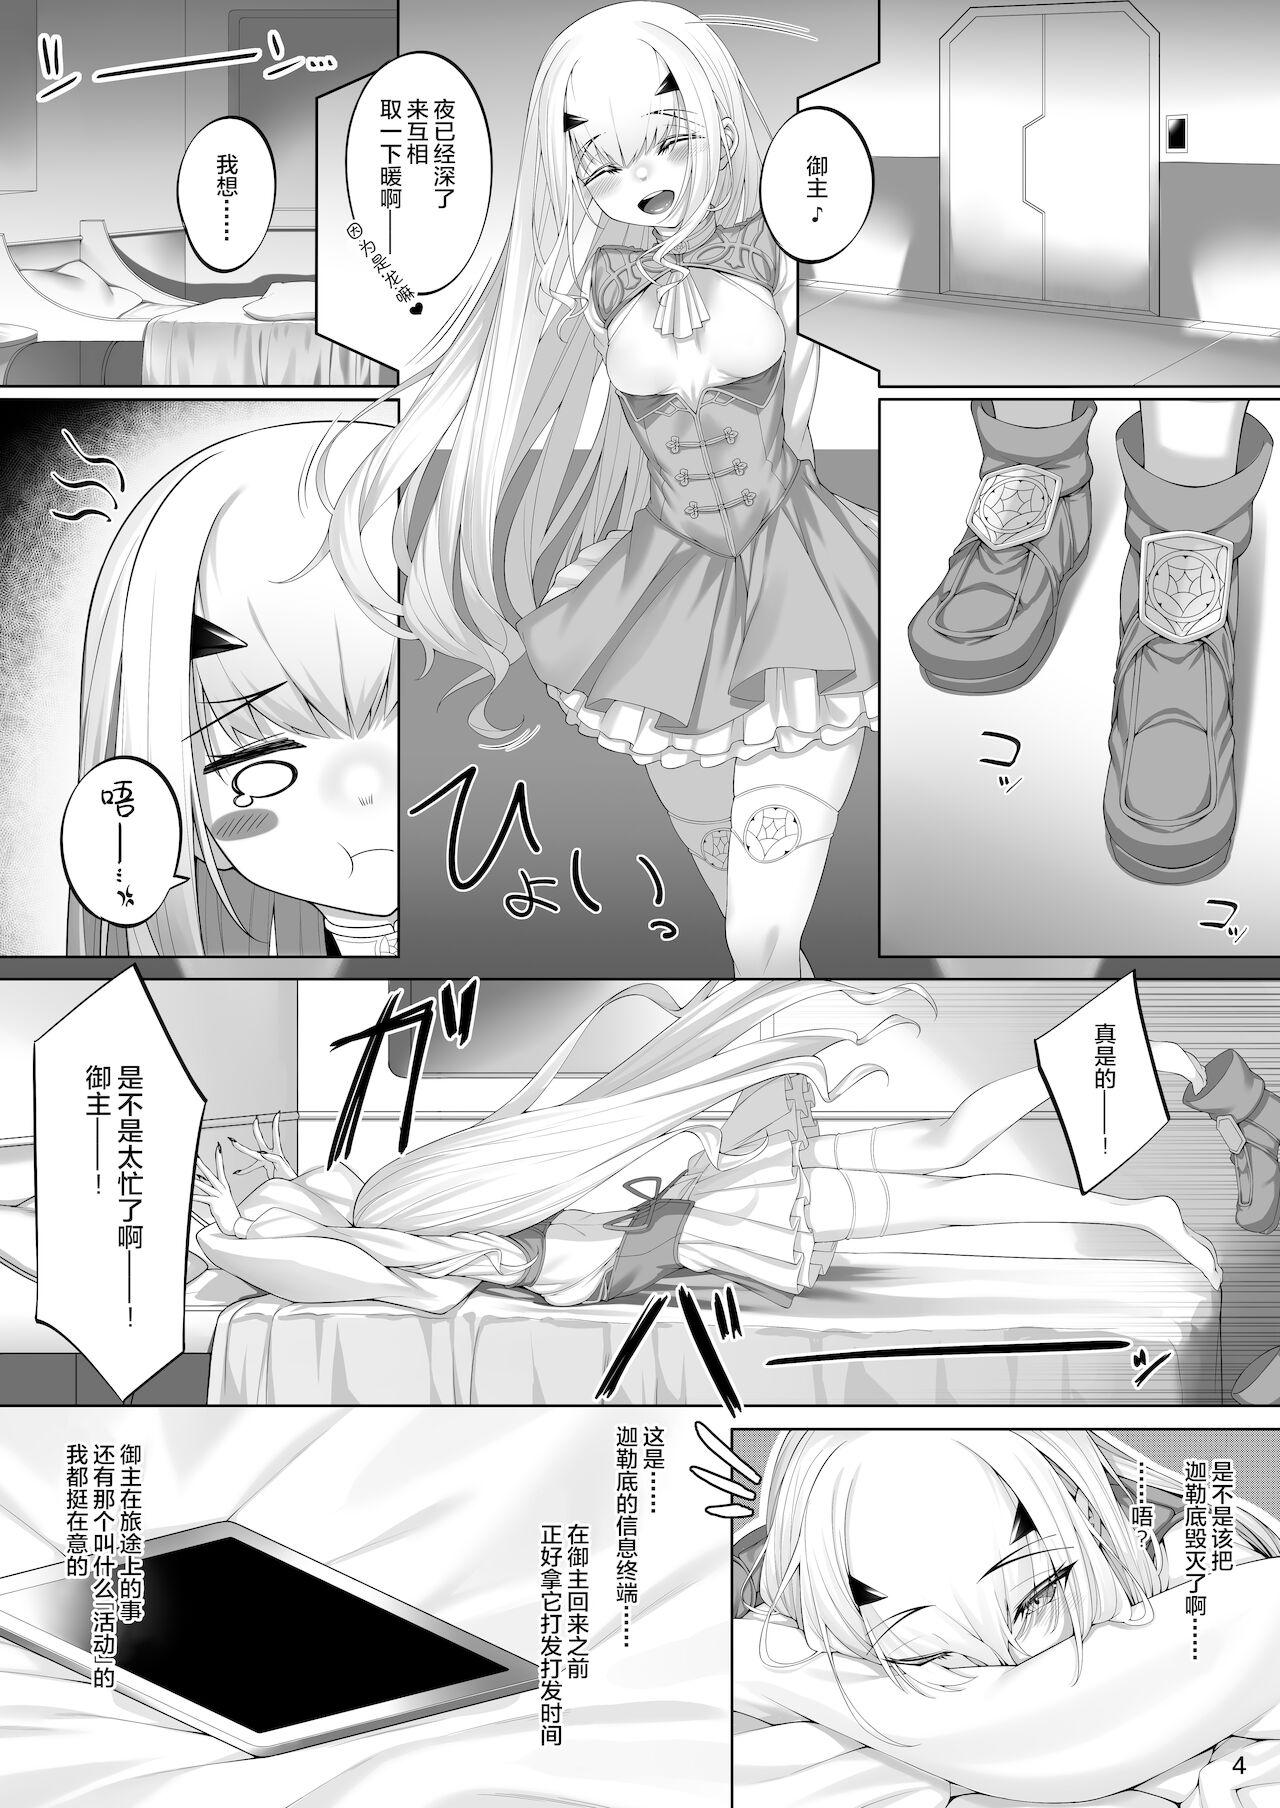 Ass Melusine to Iroiro Etchi Hon - Fate grand order Doggy - Page 3